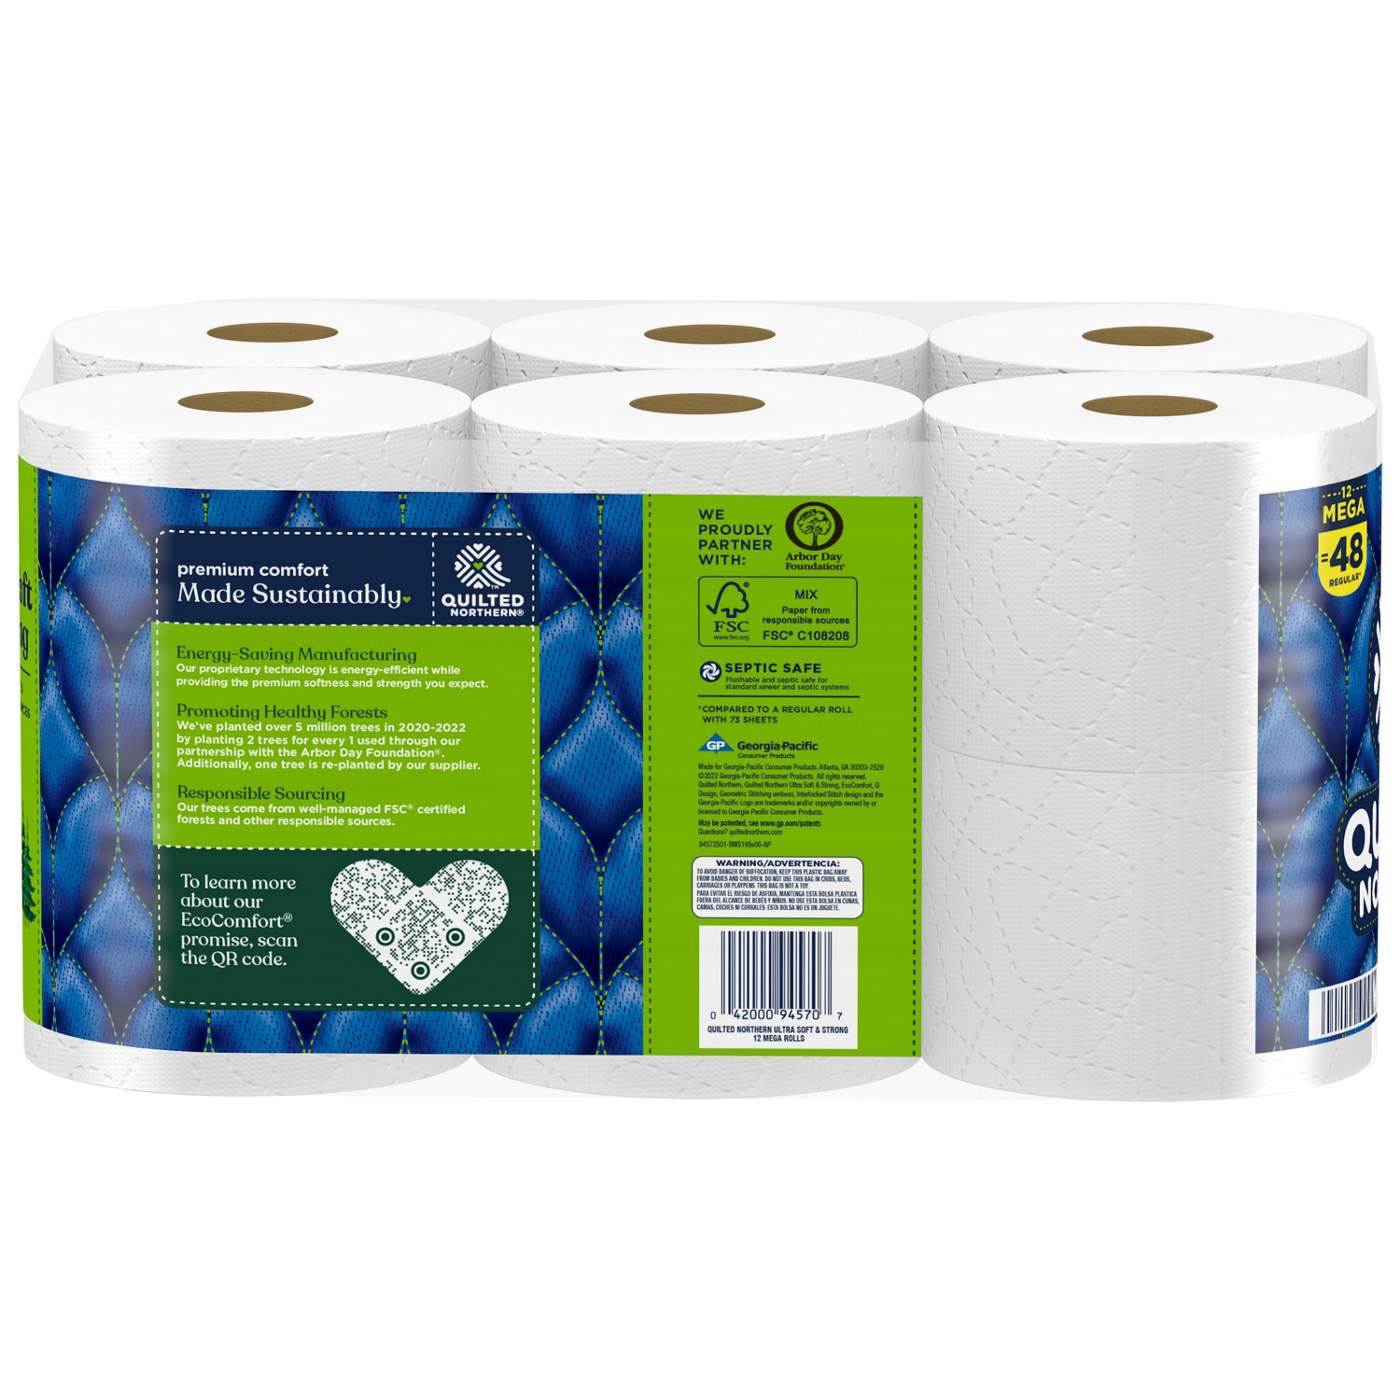  Quilted Northern Ultra Plush Toilet Paper, 12 Mega